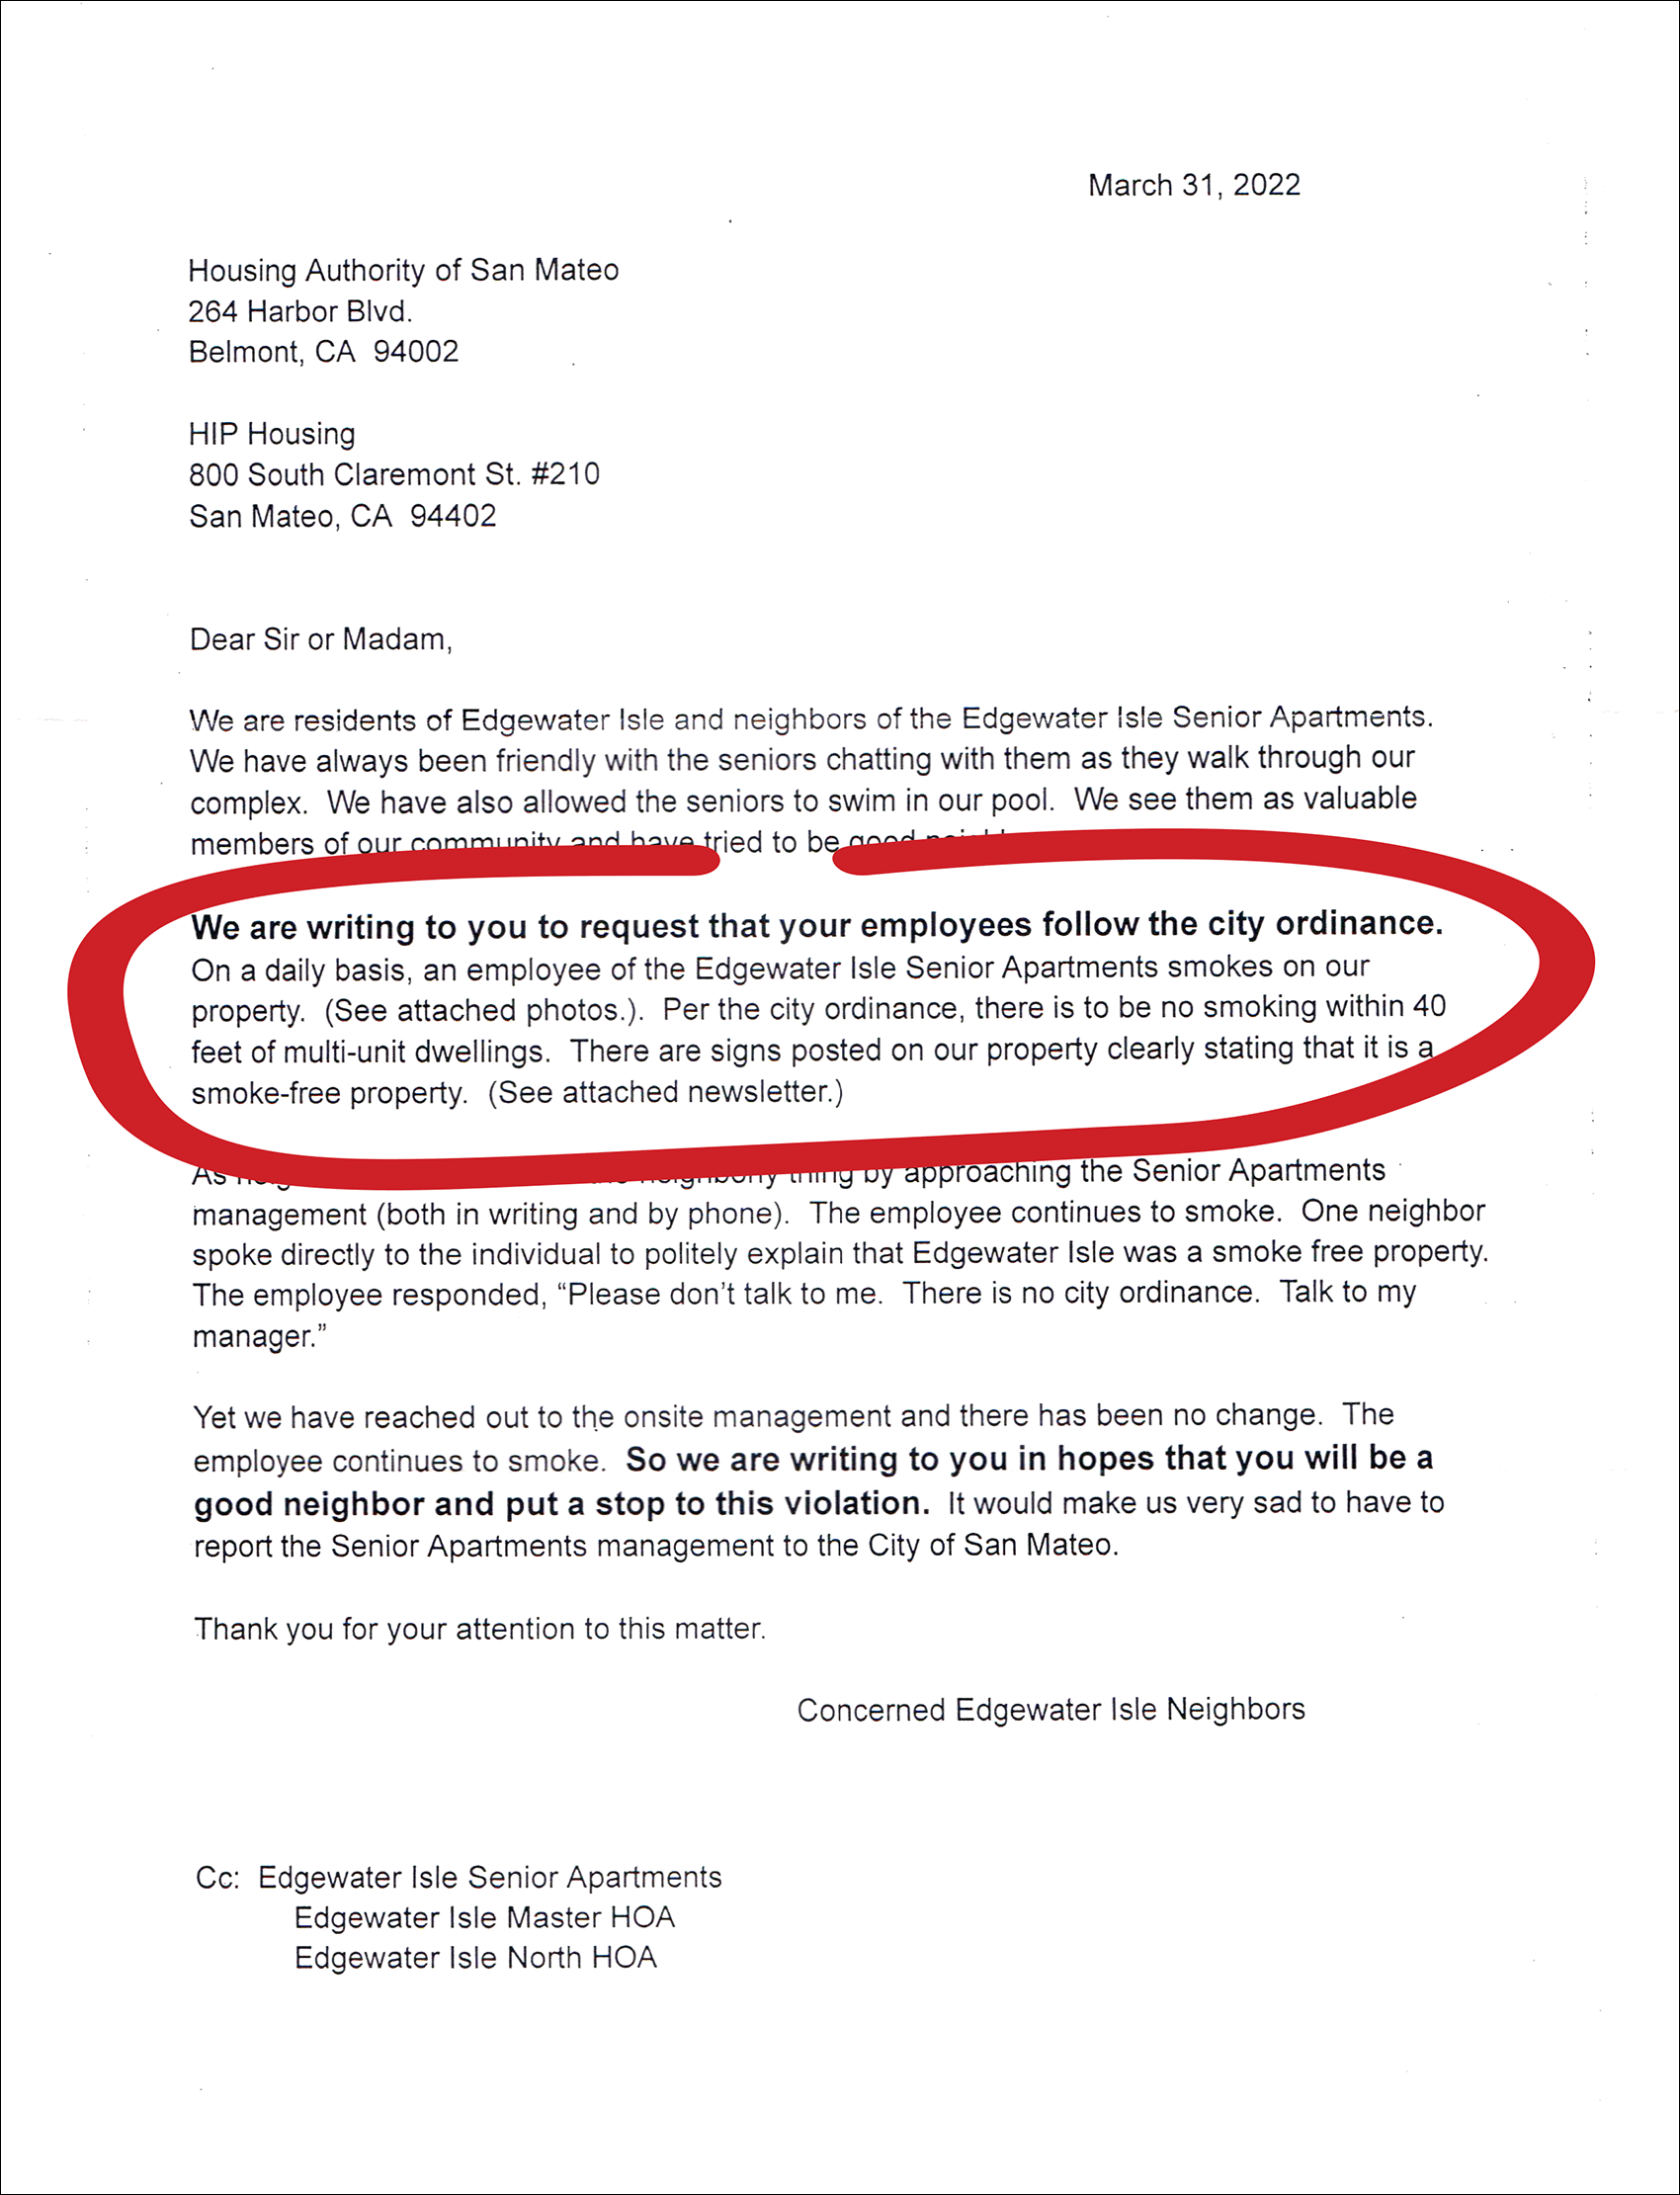 Owner letter to HIP Housing